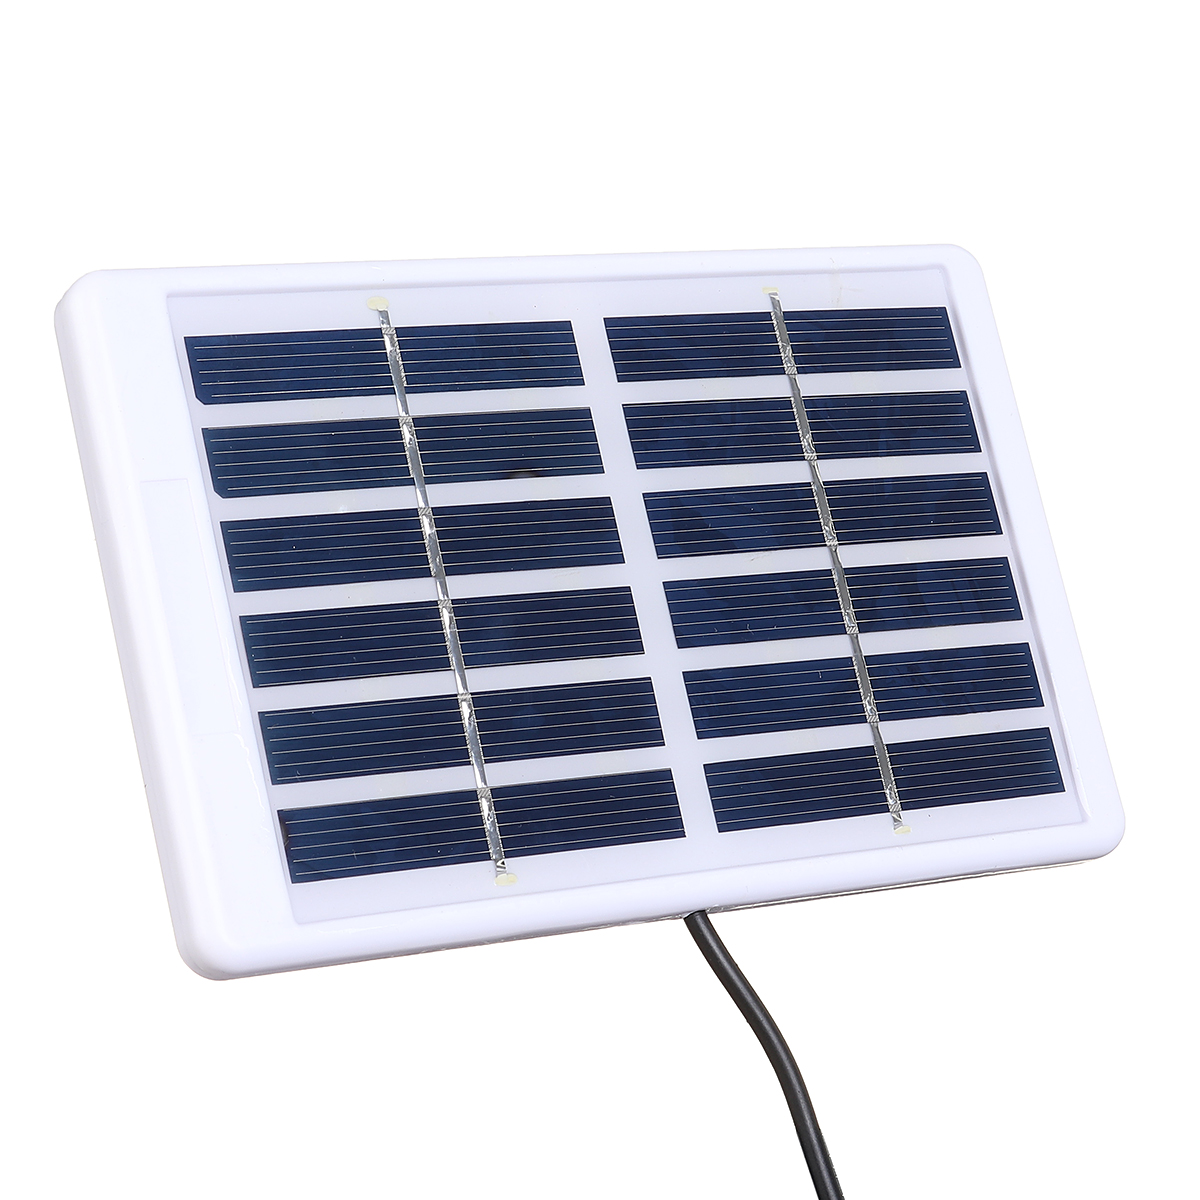 Find Mini 5W 6V USB Solar Panel Polysilicon Solar Power Panel Charger for Sale on Gipsybee.com with cryptocurrencies